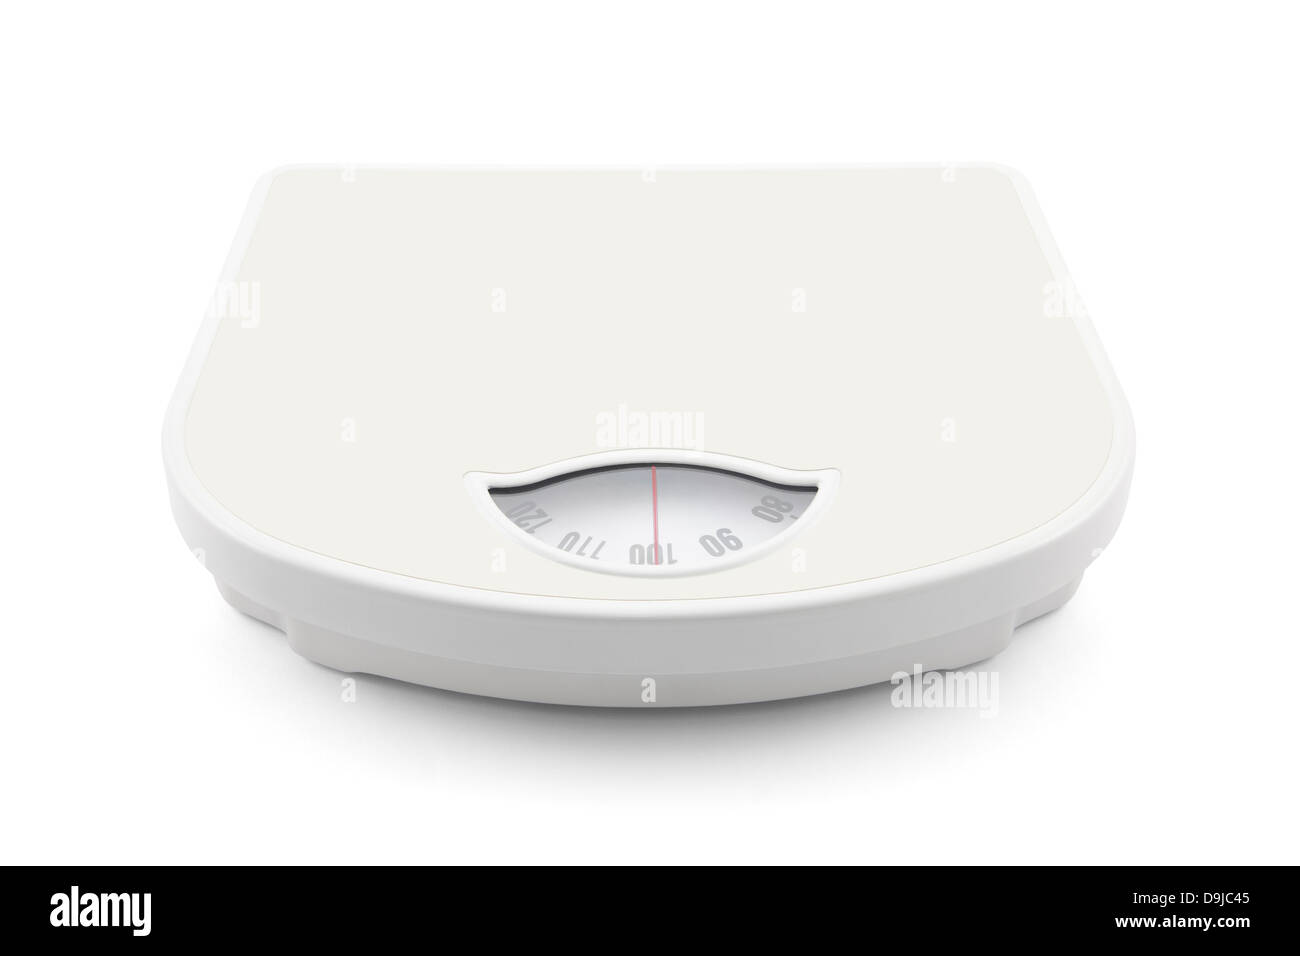 Bathroom scale with clipping path Stock Photo